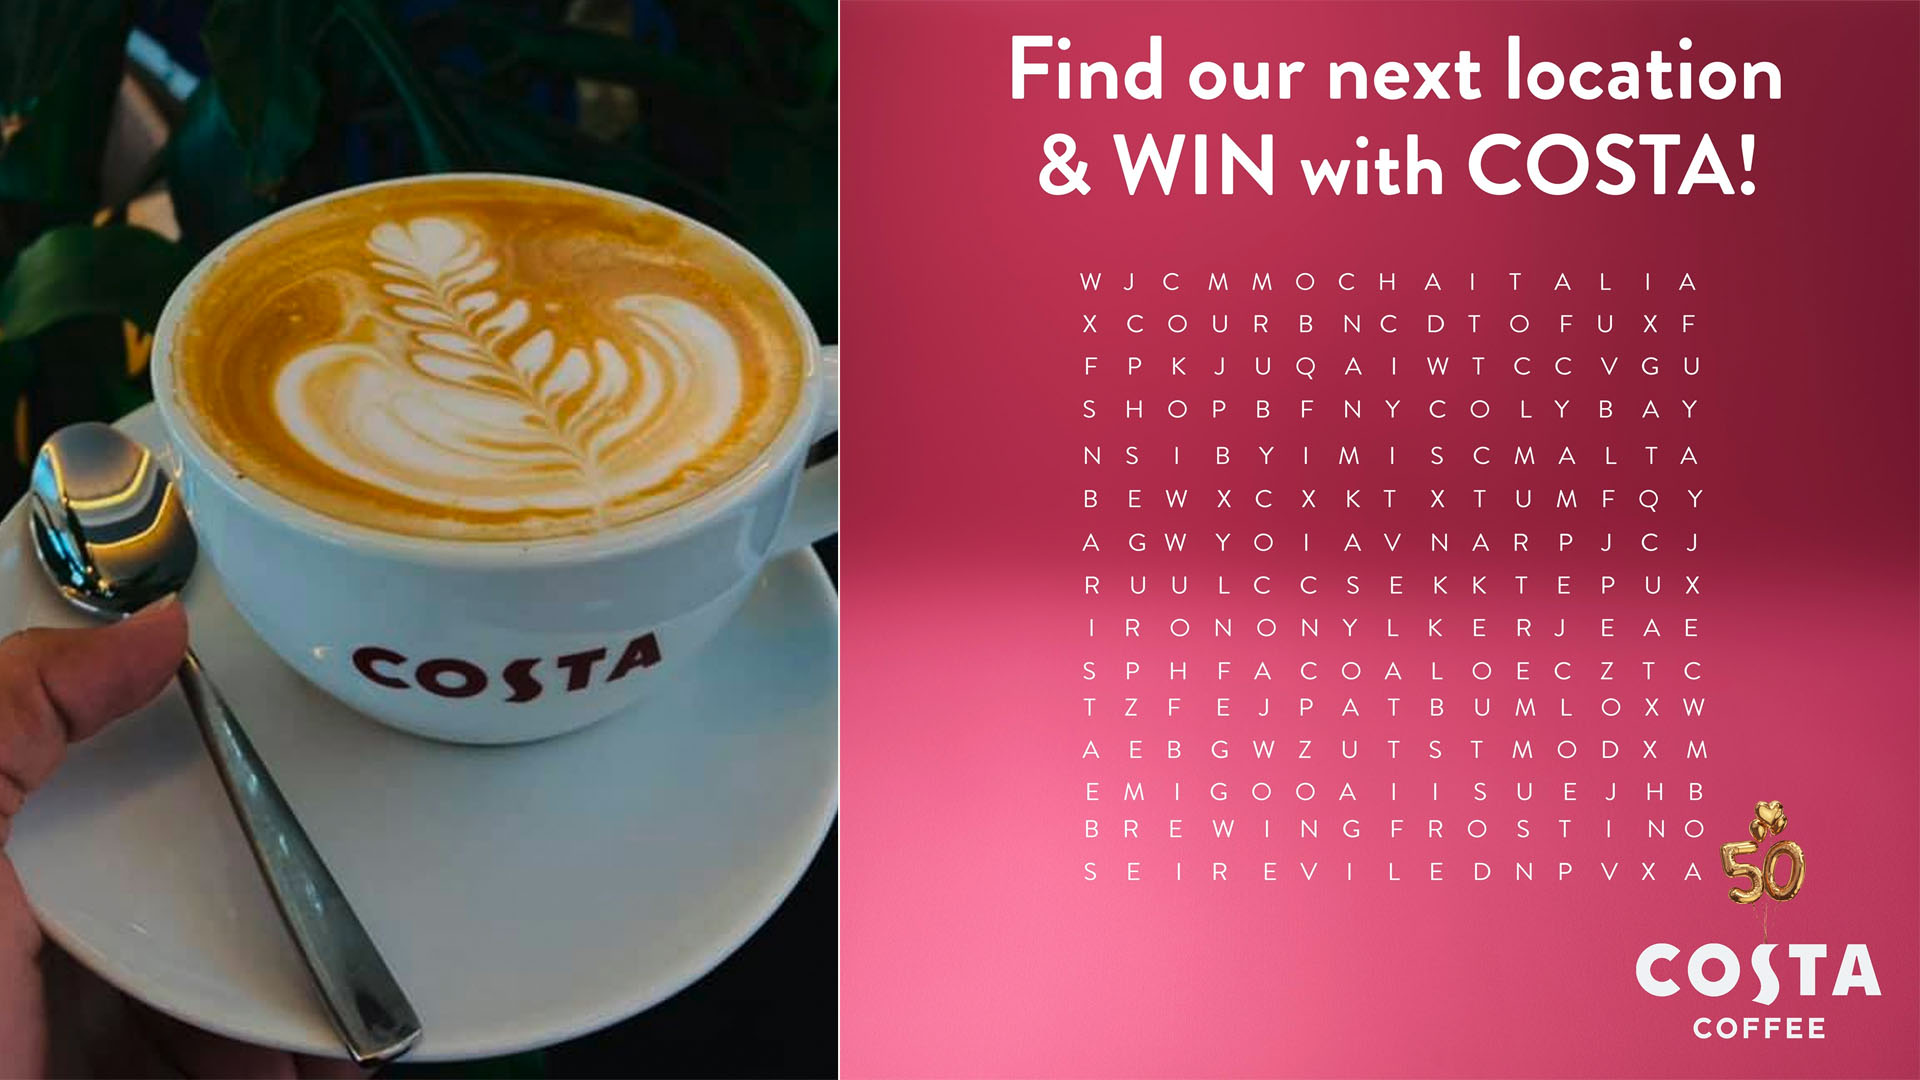 Costa Coffee Malta coming to a mystery location near you!